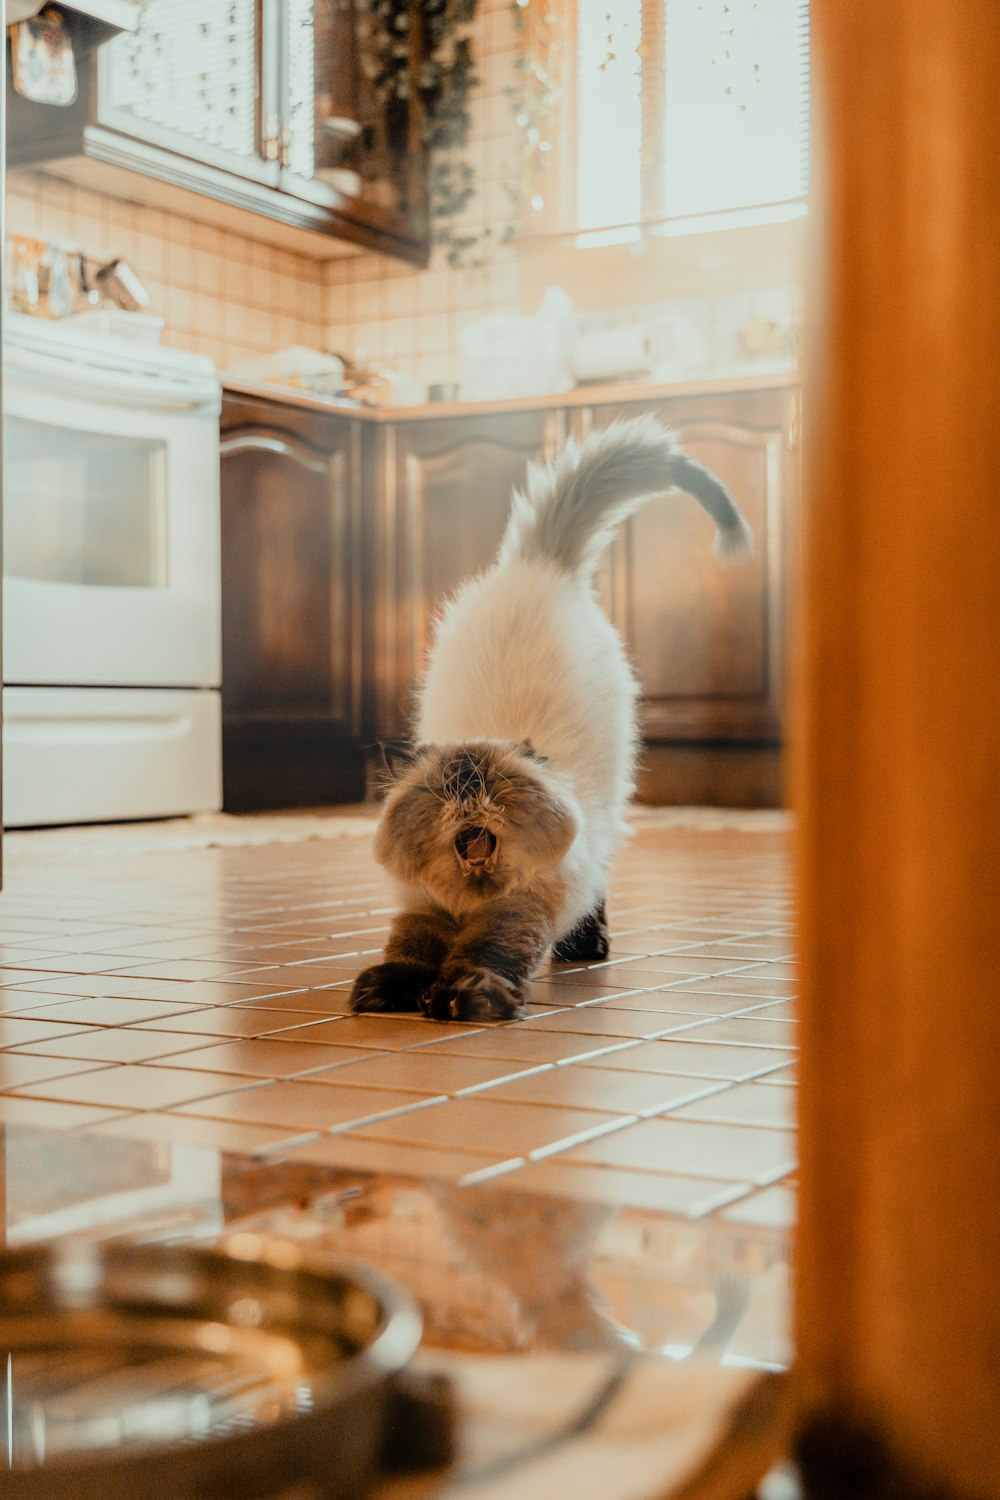 a cat that is standing on a tile floor